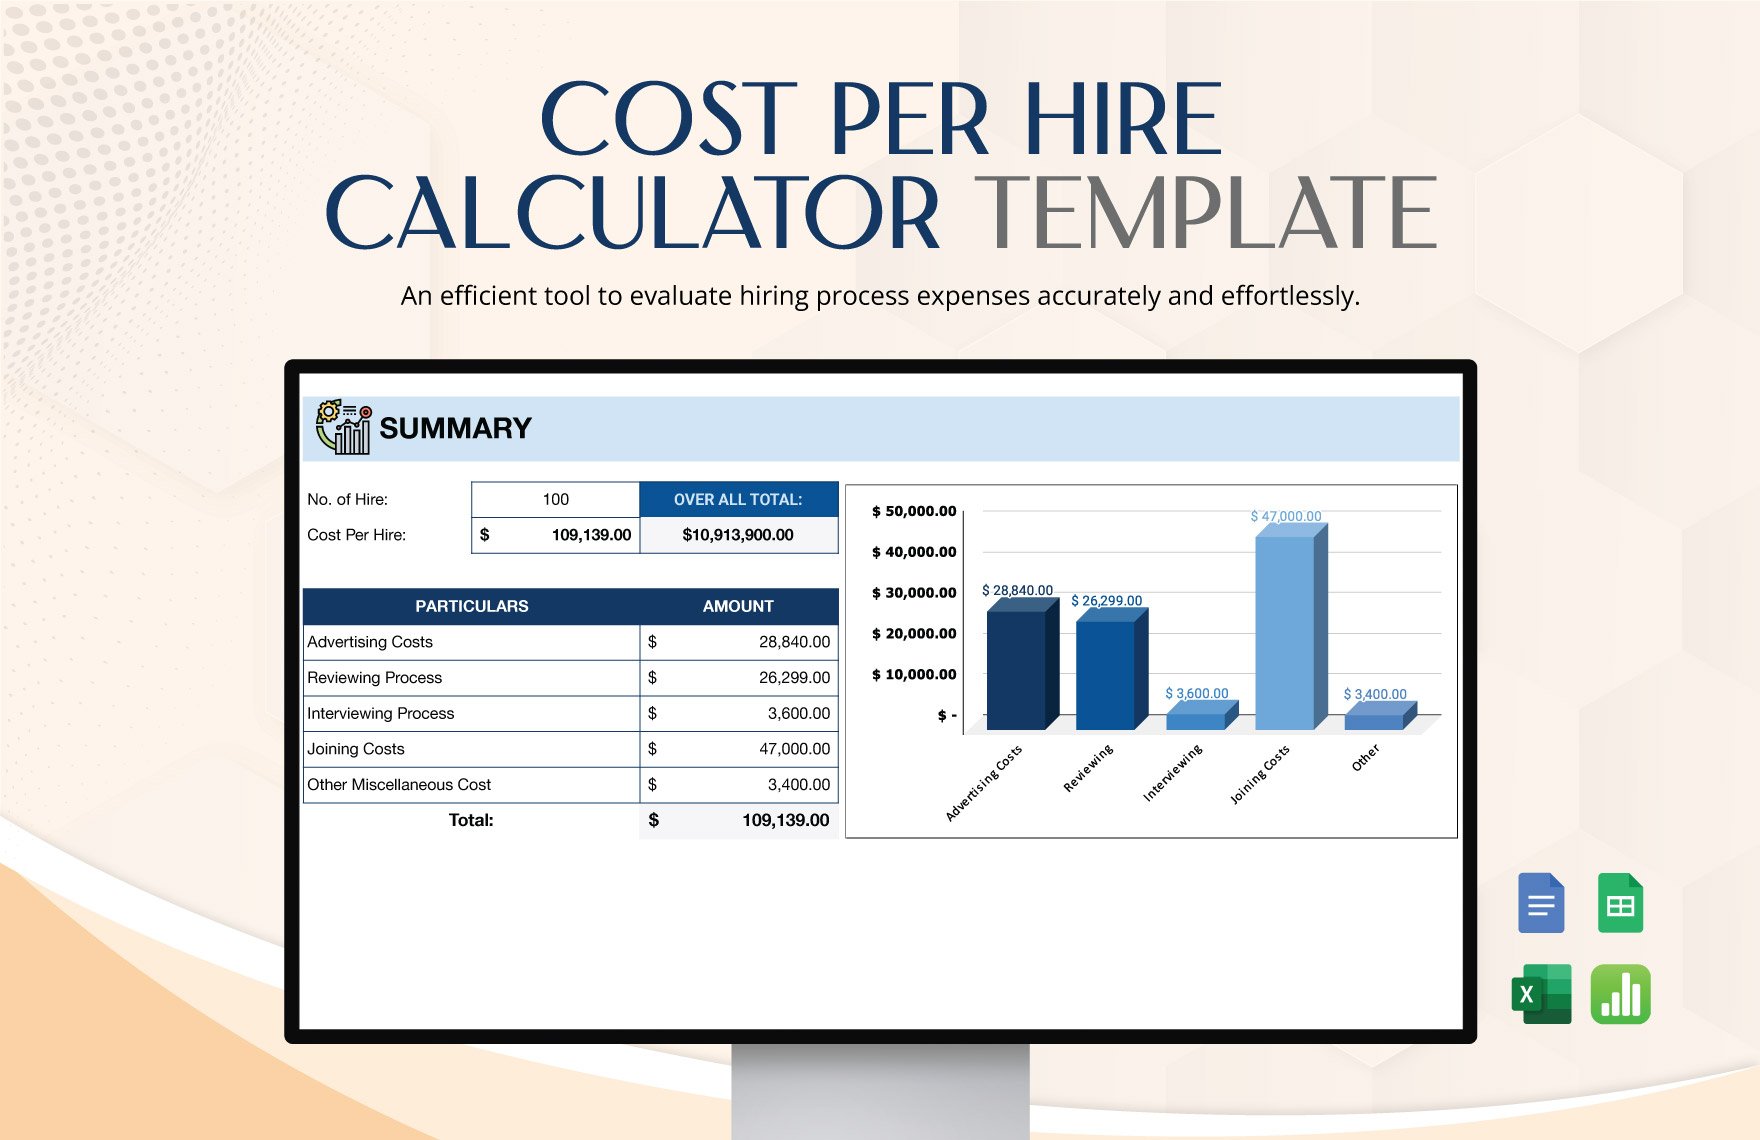 Cost Per Hire Calculator Template in Google Docs, Excel, Google Sheets, Apple Numbers